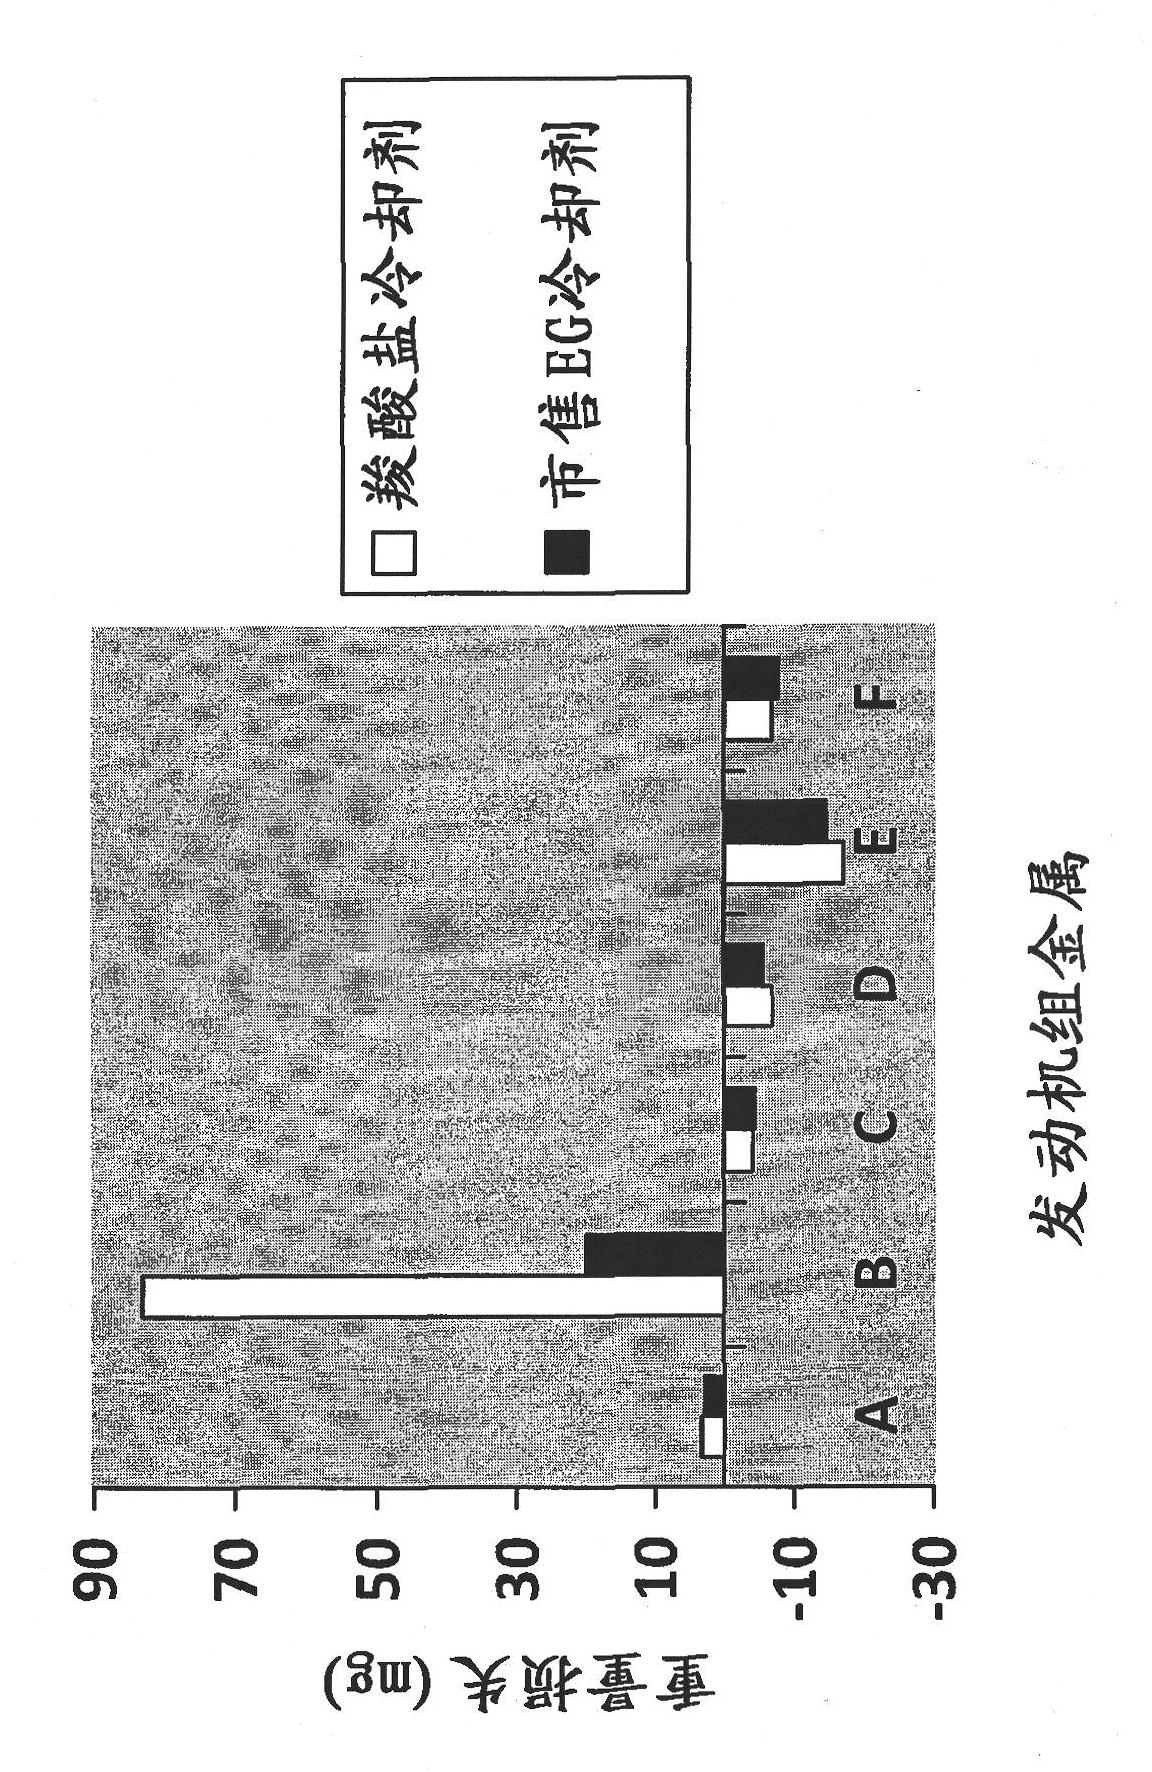 Deicing and heat transfer fluid compositions and methods of use